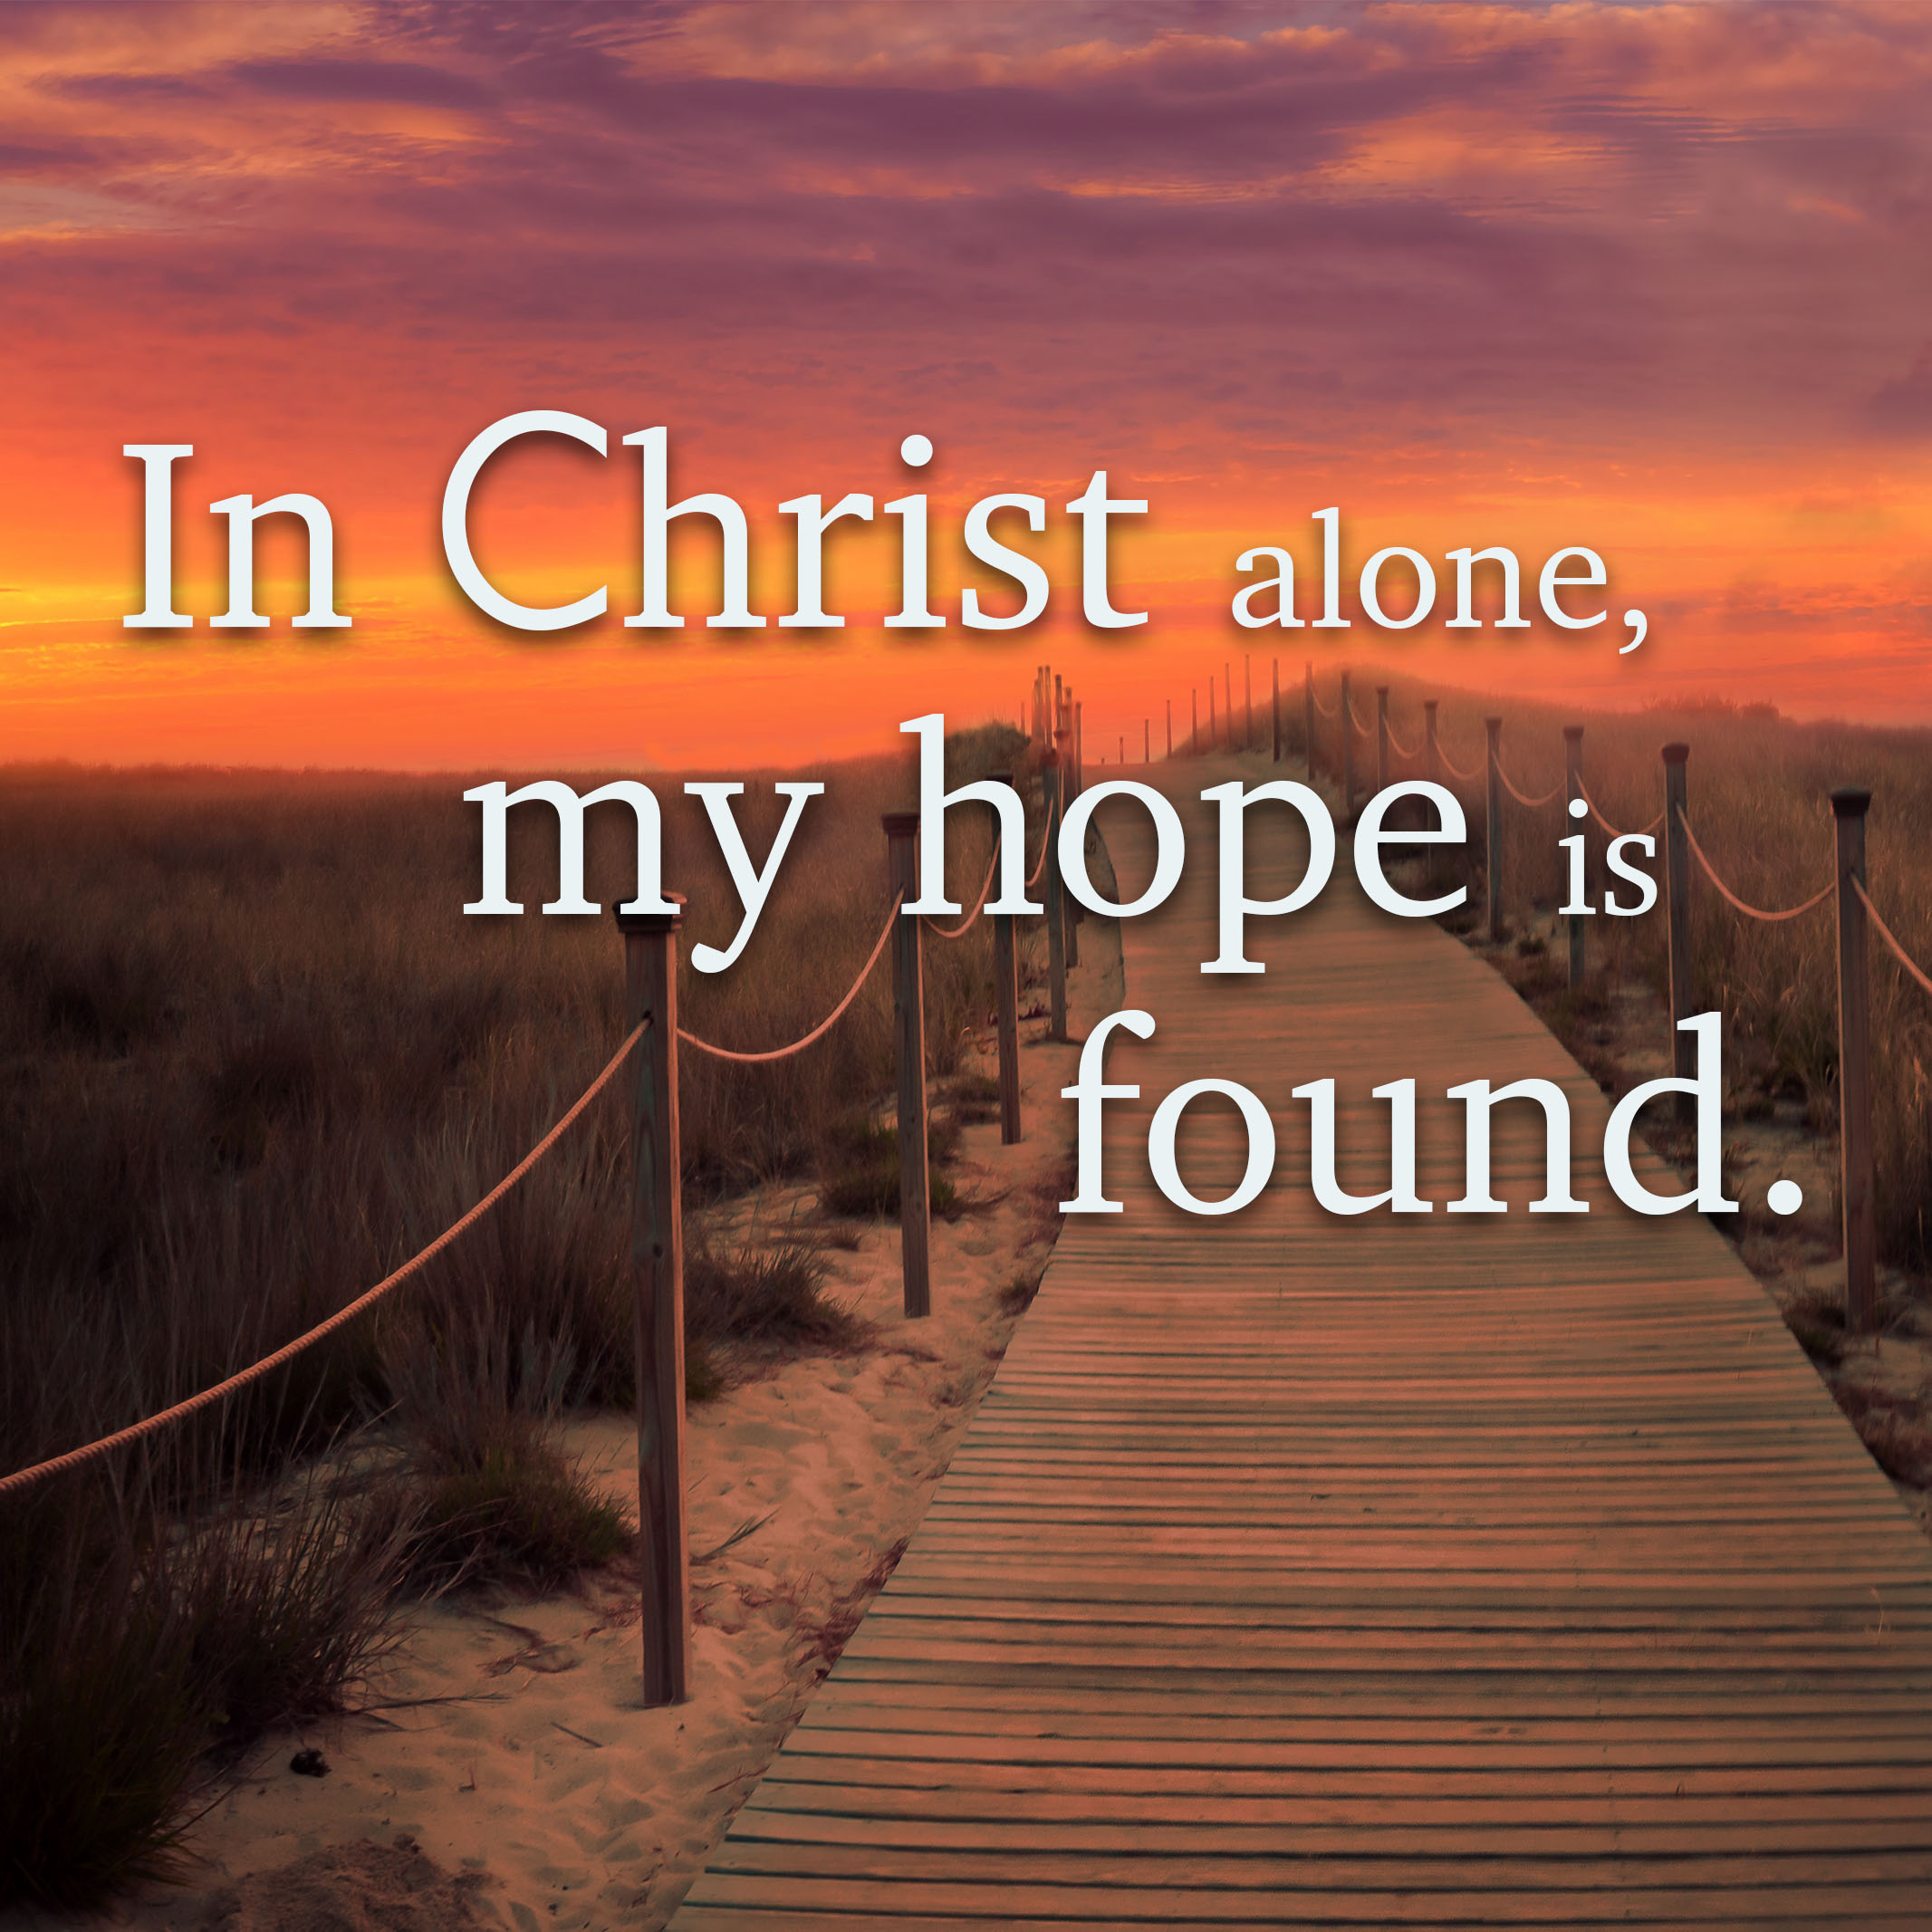 In Christ alone, my hope is found - Life - Faith Pixel